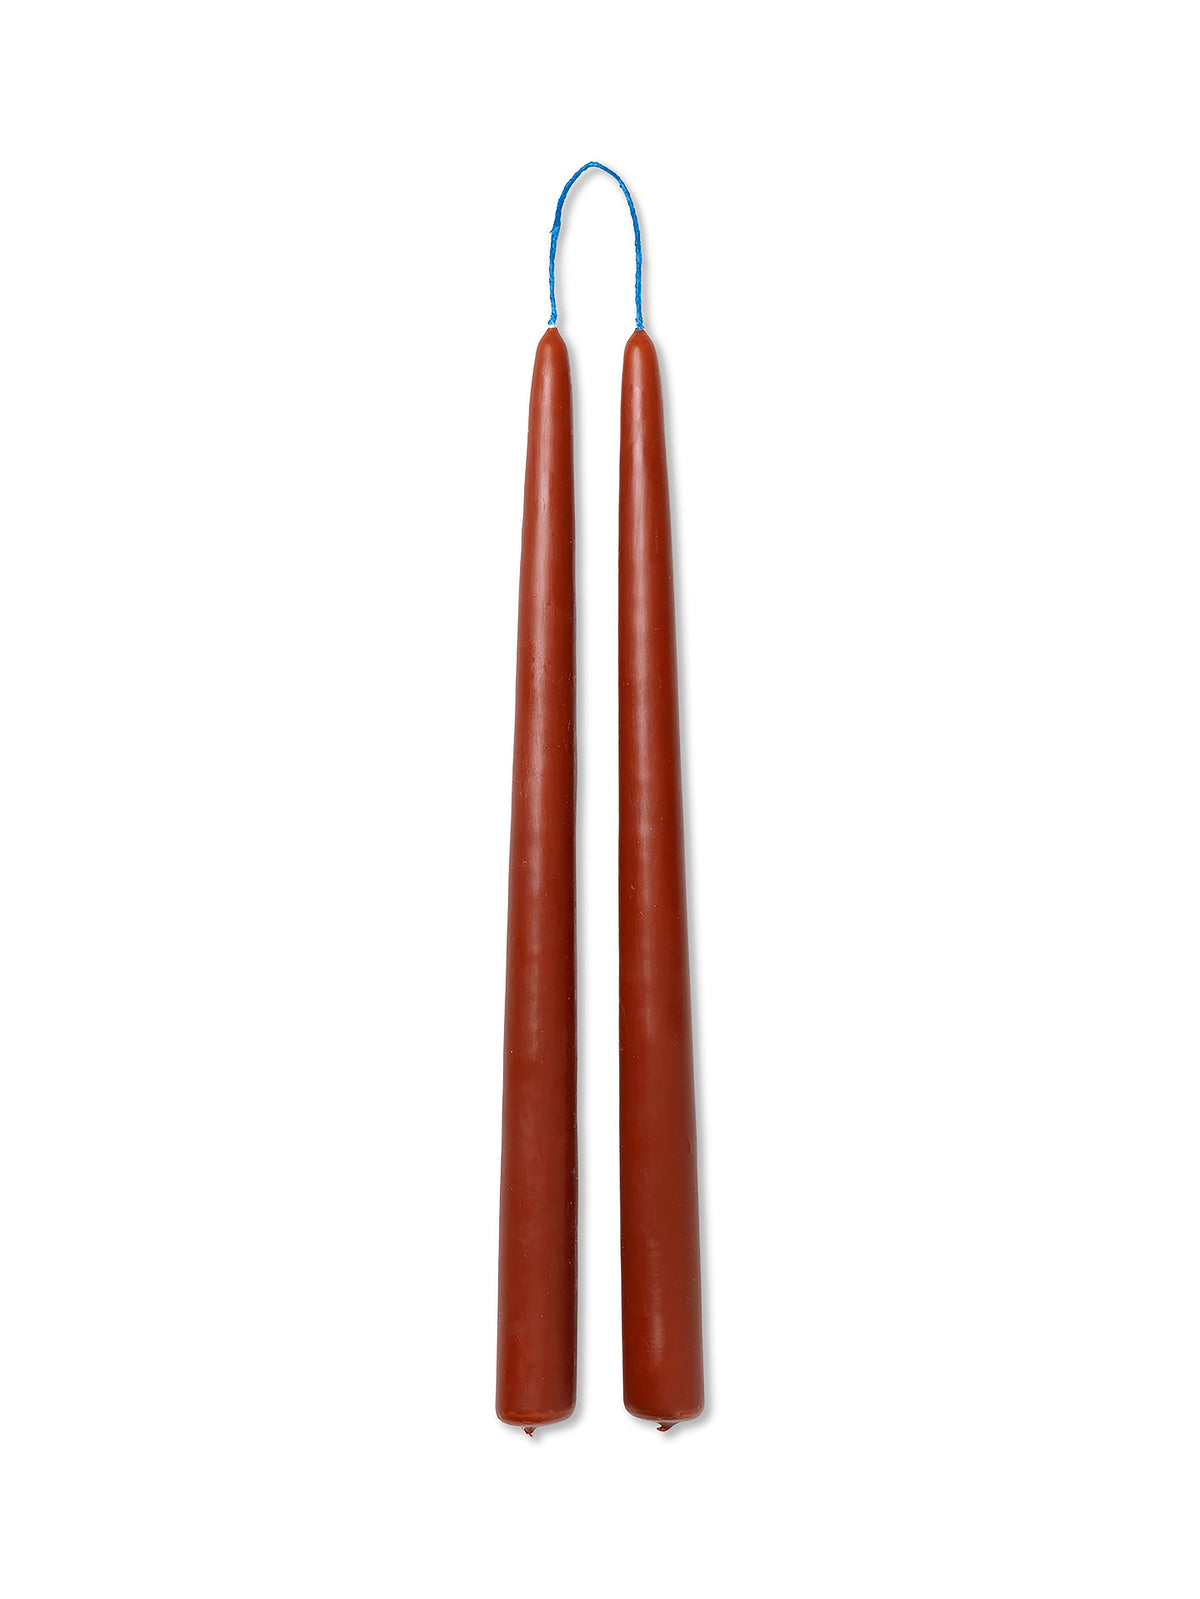 Dipped Candles | Rust | Set of 2 | by ferm Living - Lifestory - ferm LIVING